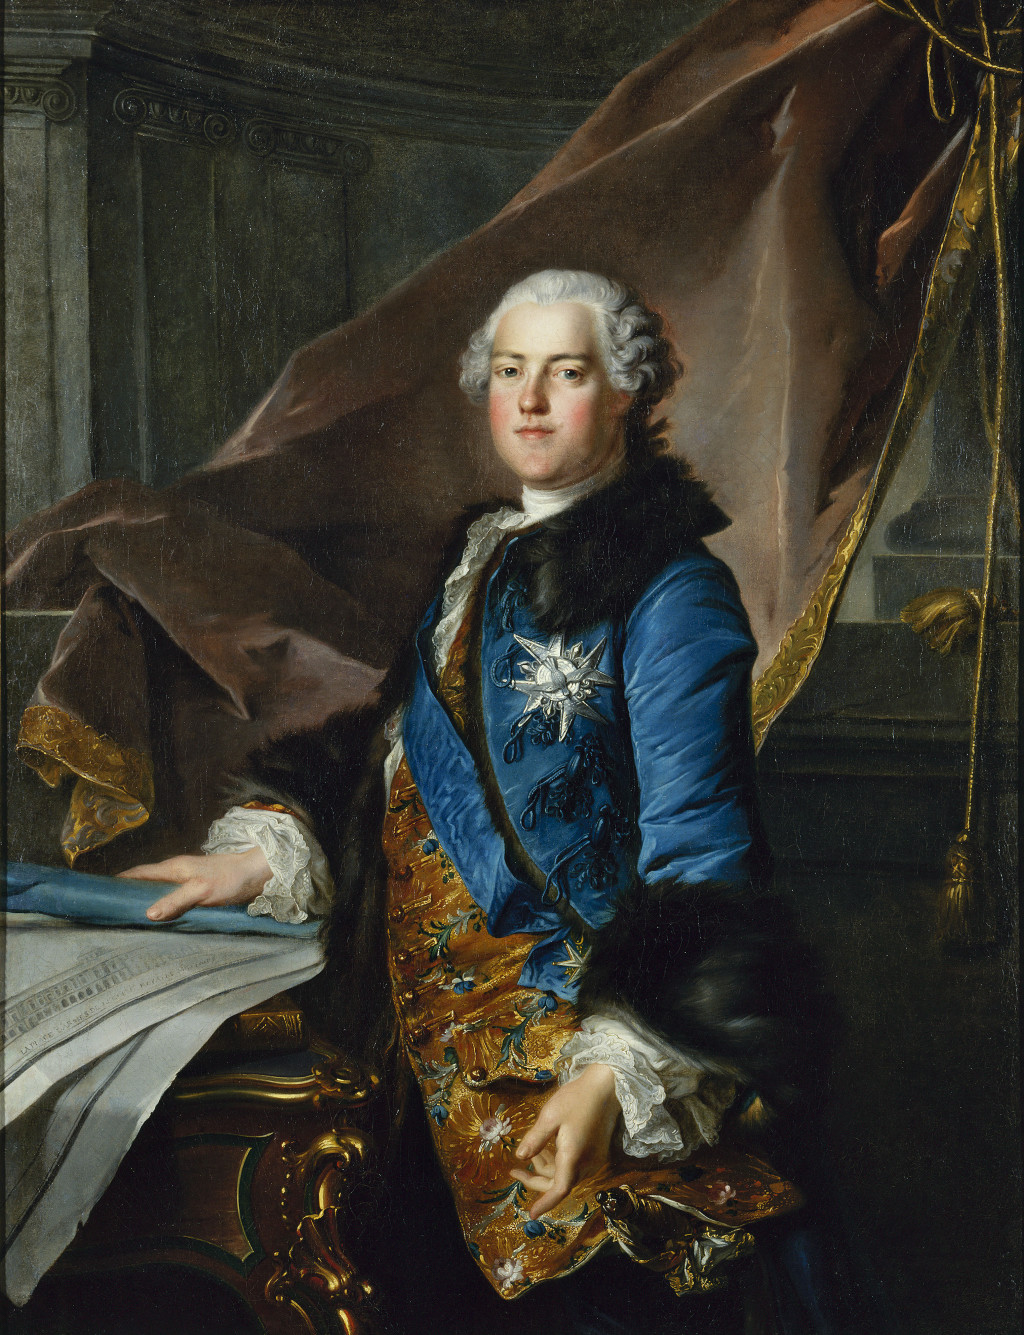 Portrait of Marigny in military uniform standing in front of two maps on a table